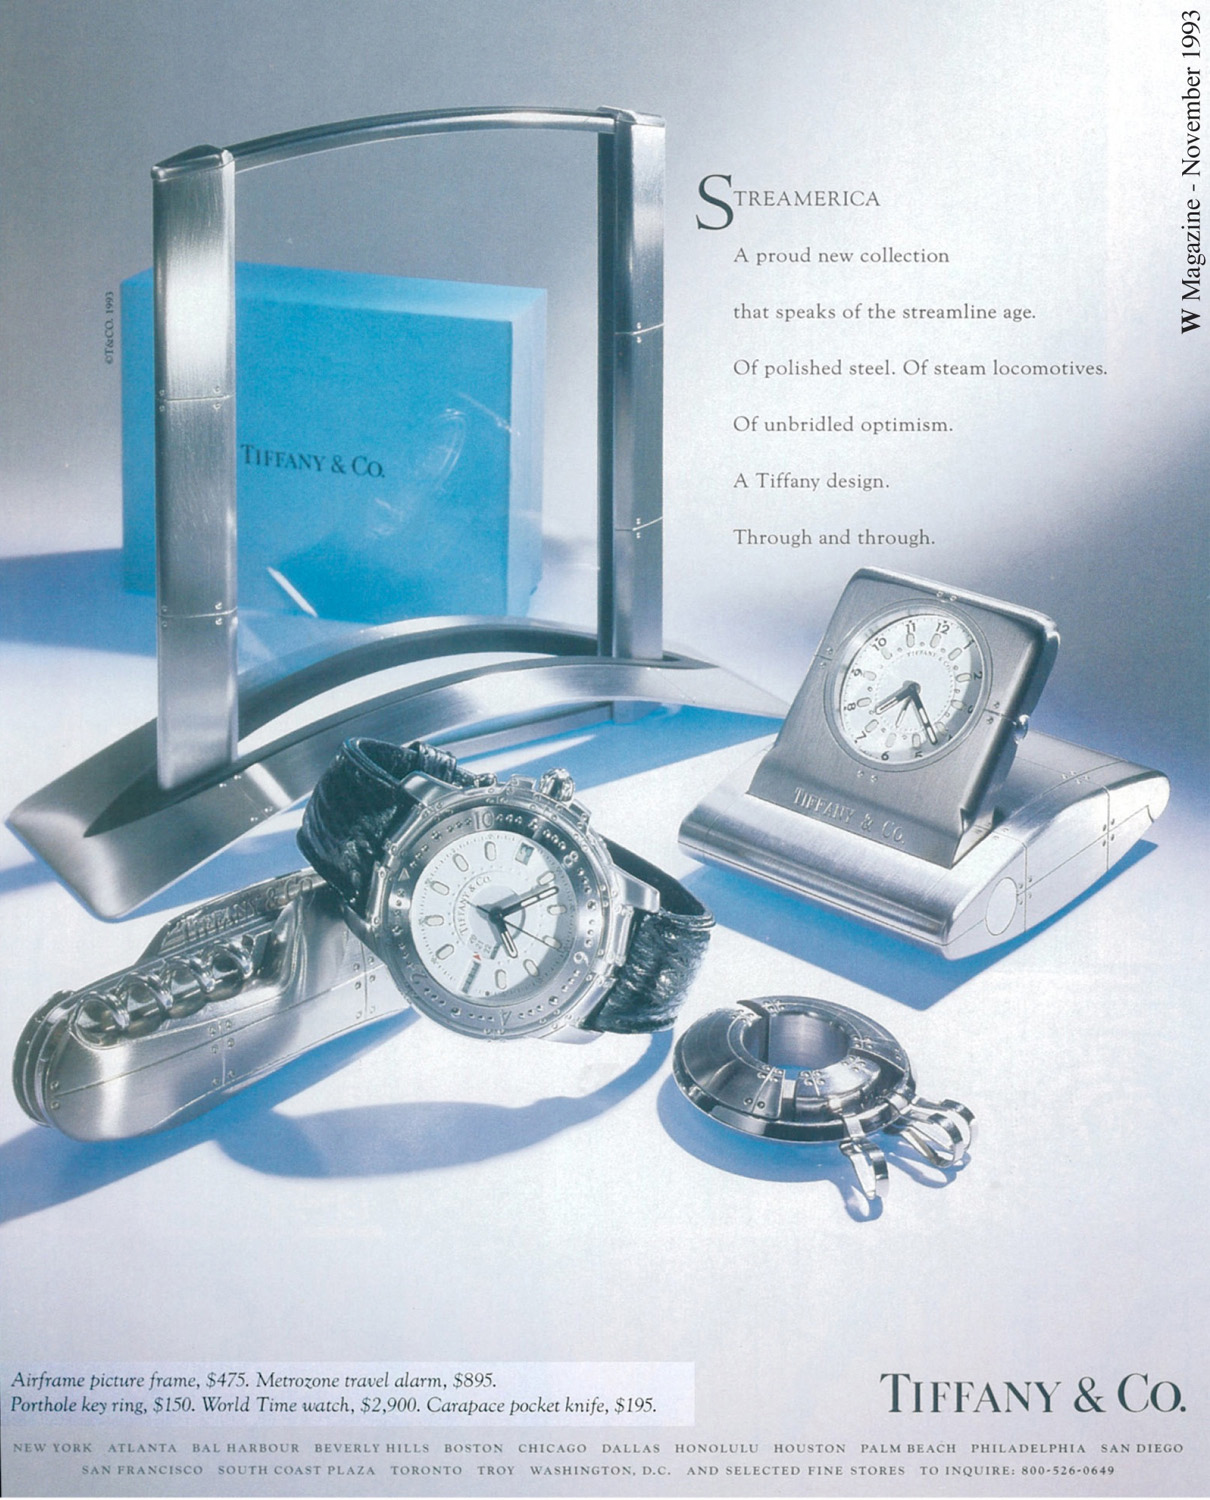 W Magazine Advertisement - Nov 1993 debut of the Streamerica Collection by Tiffany & Co. Airframe Large Picture Frame, Carapace Pocket Knife, World time Watch, Metrozone Travel Alarm, and Porthole Key Ring.